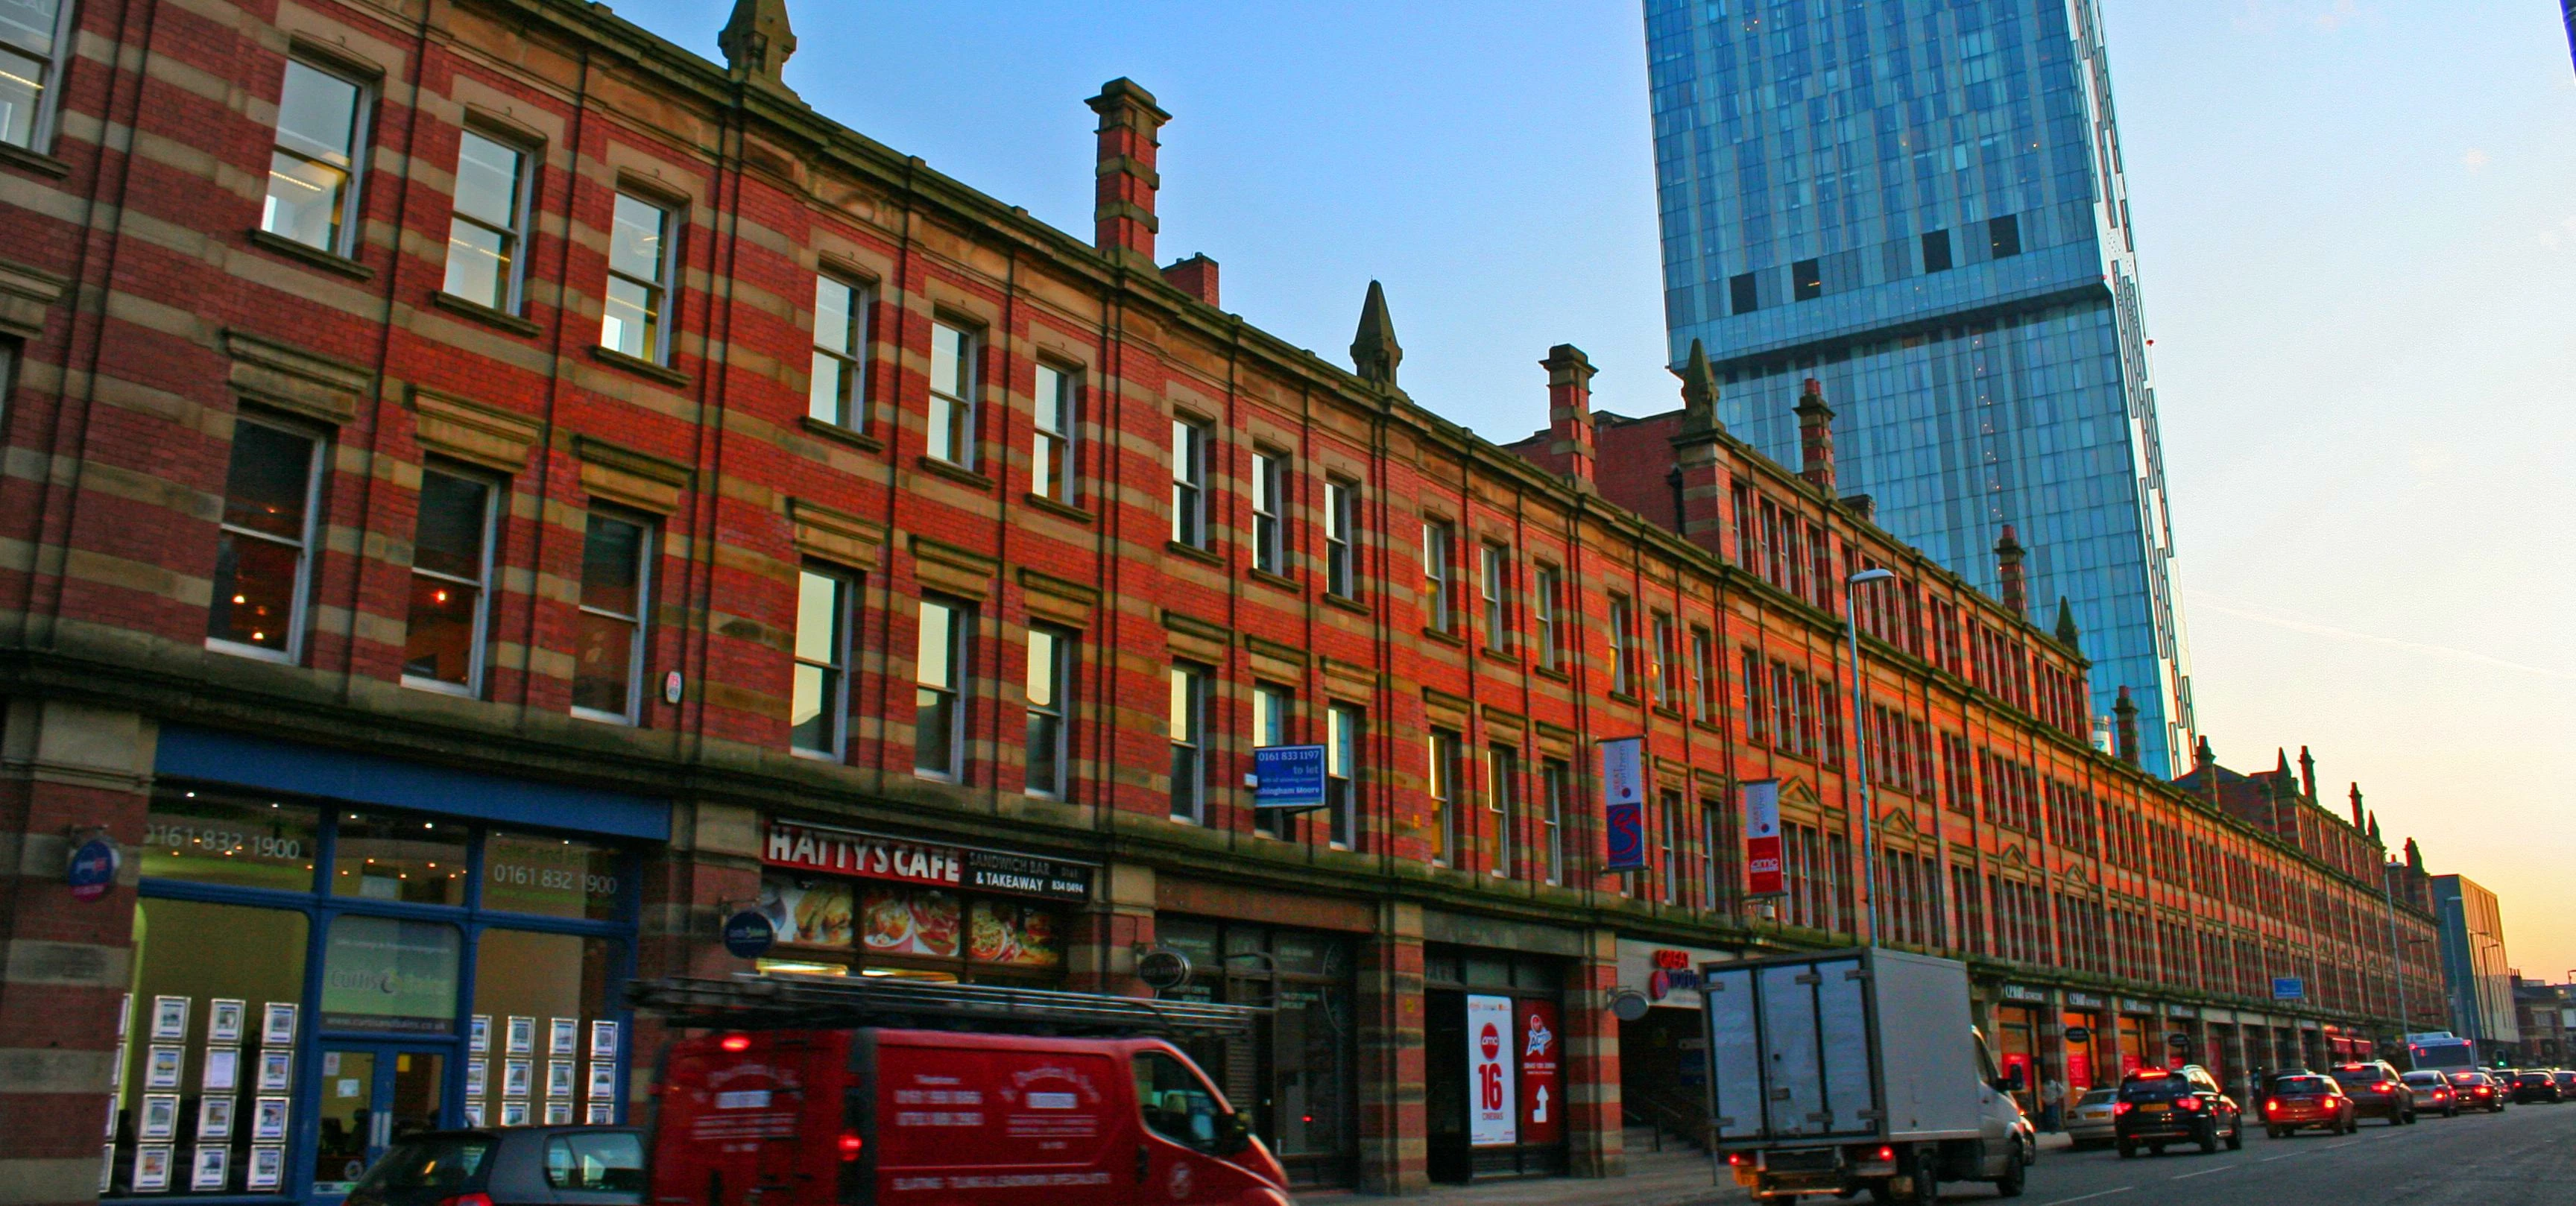 Deansgate - Long, old, red-brick horizontal  v  Tall, new, glass vertical